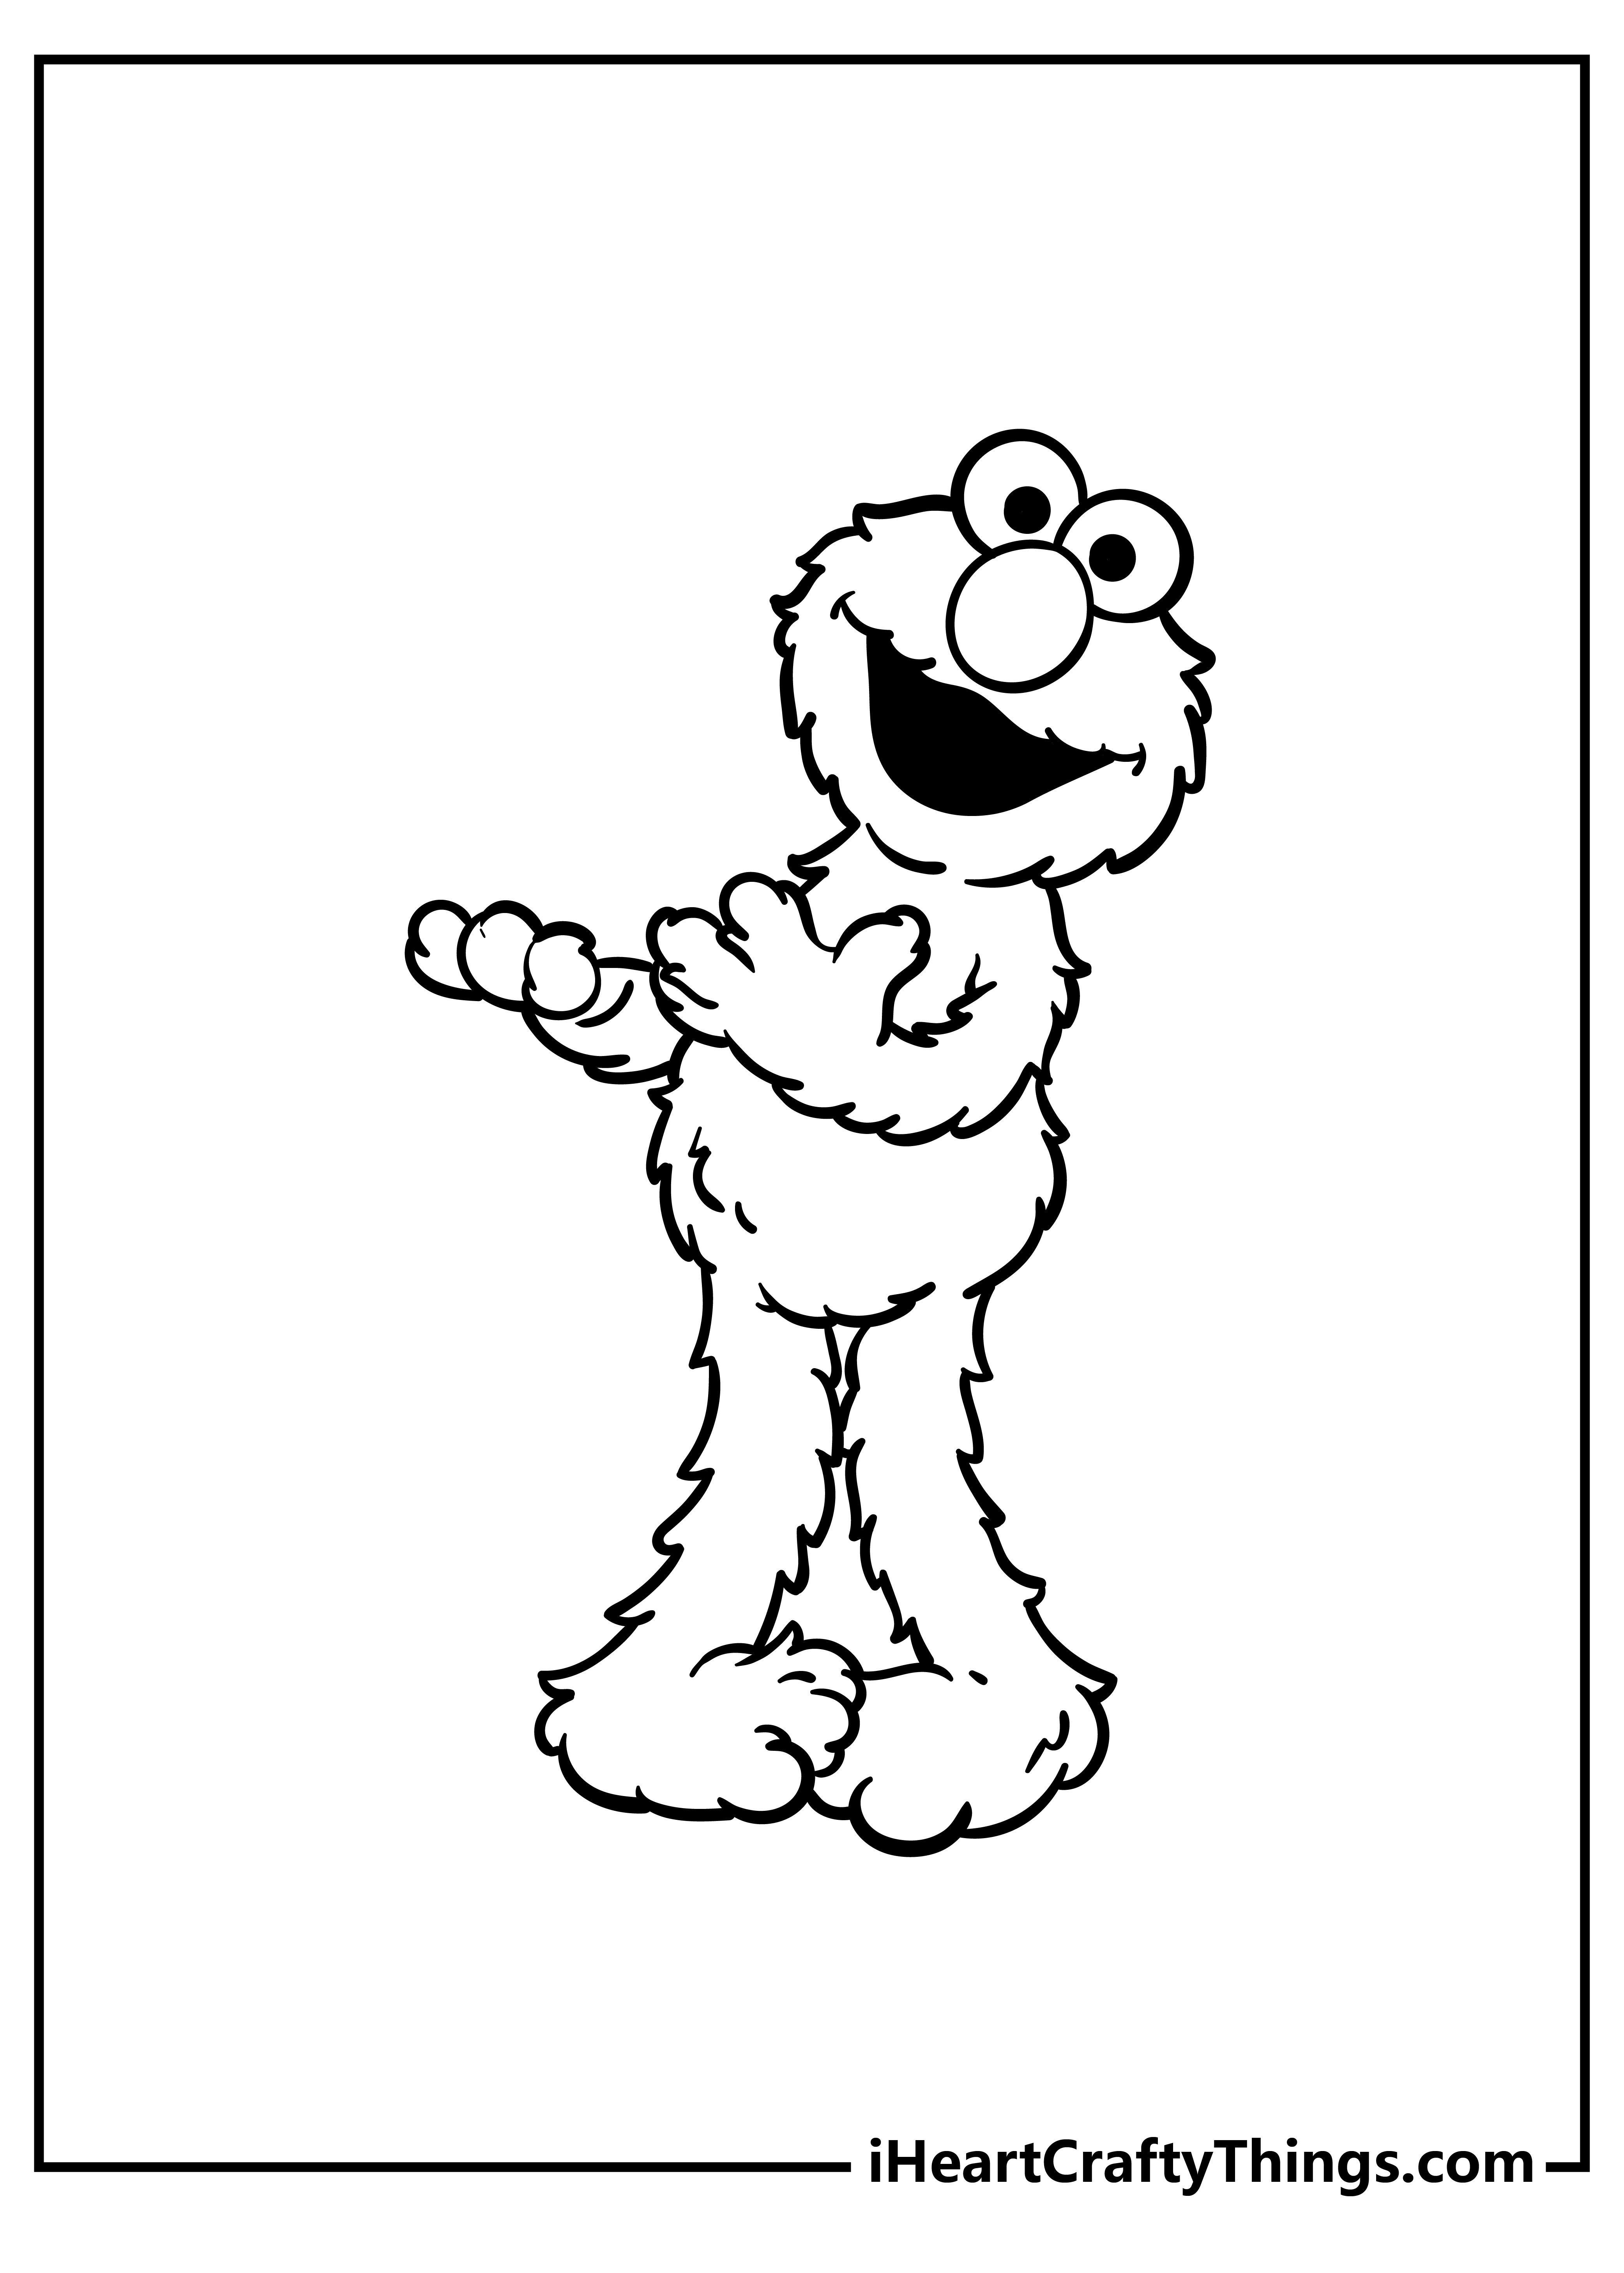 Elmo Coloring Pages for kids free download